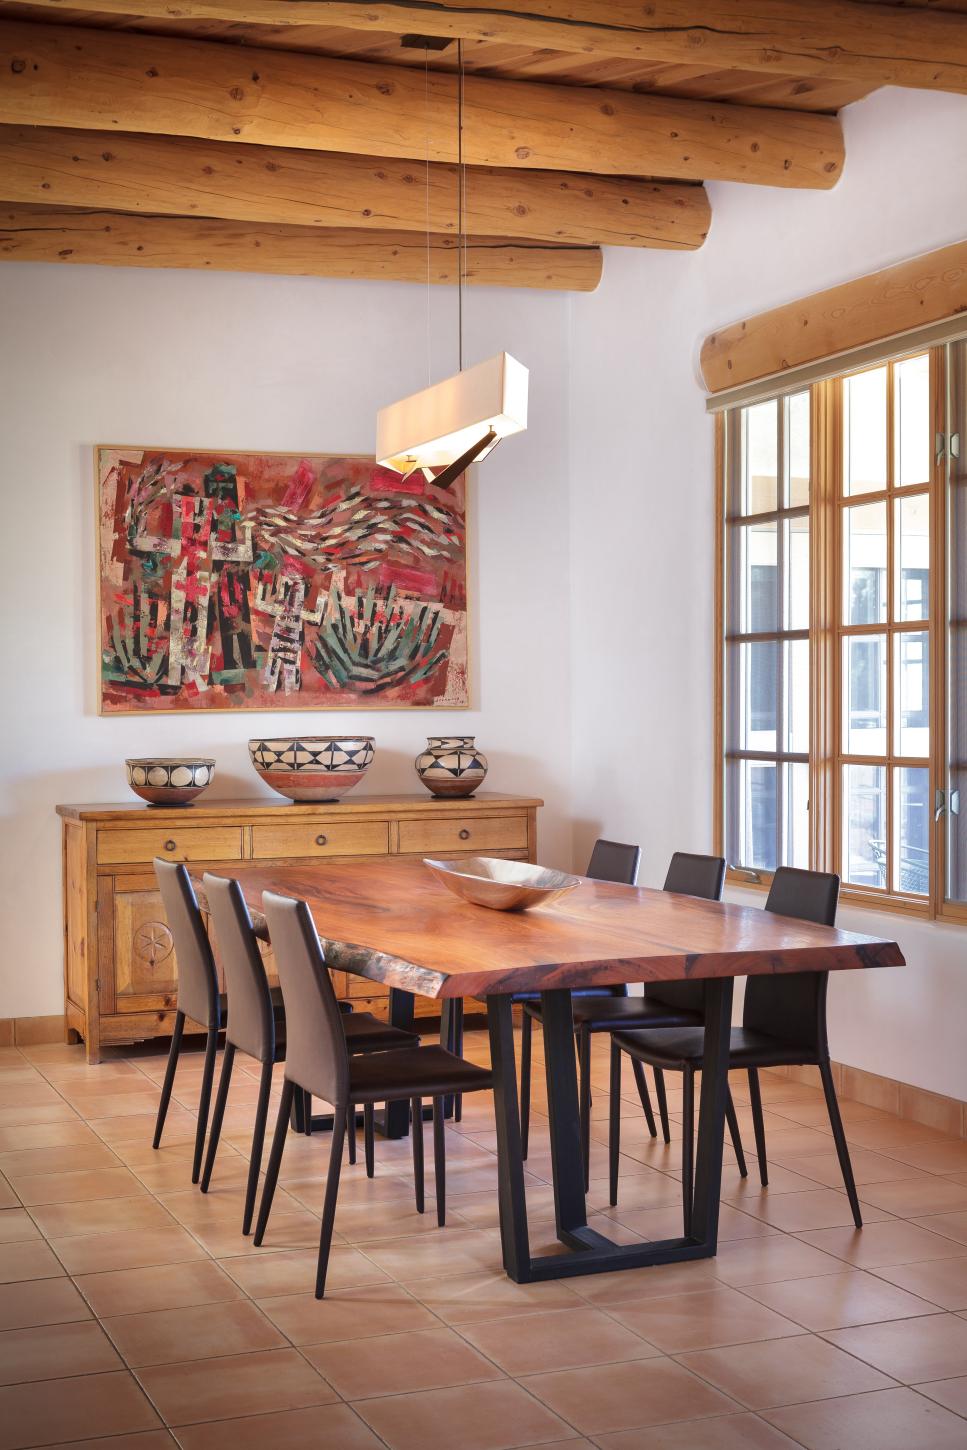 Natural Wood Exposed Beams Over, Southwestern Dining Room Chairs